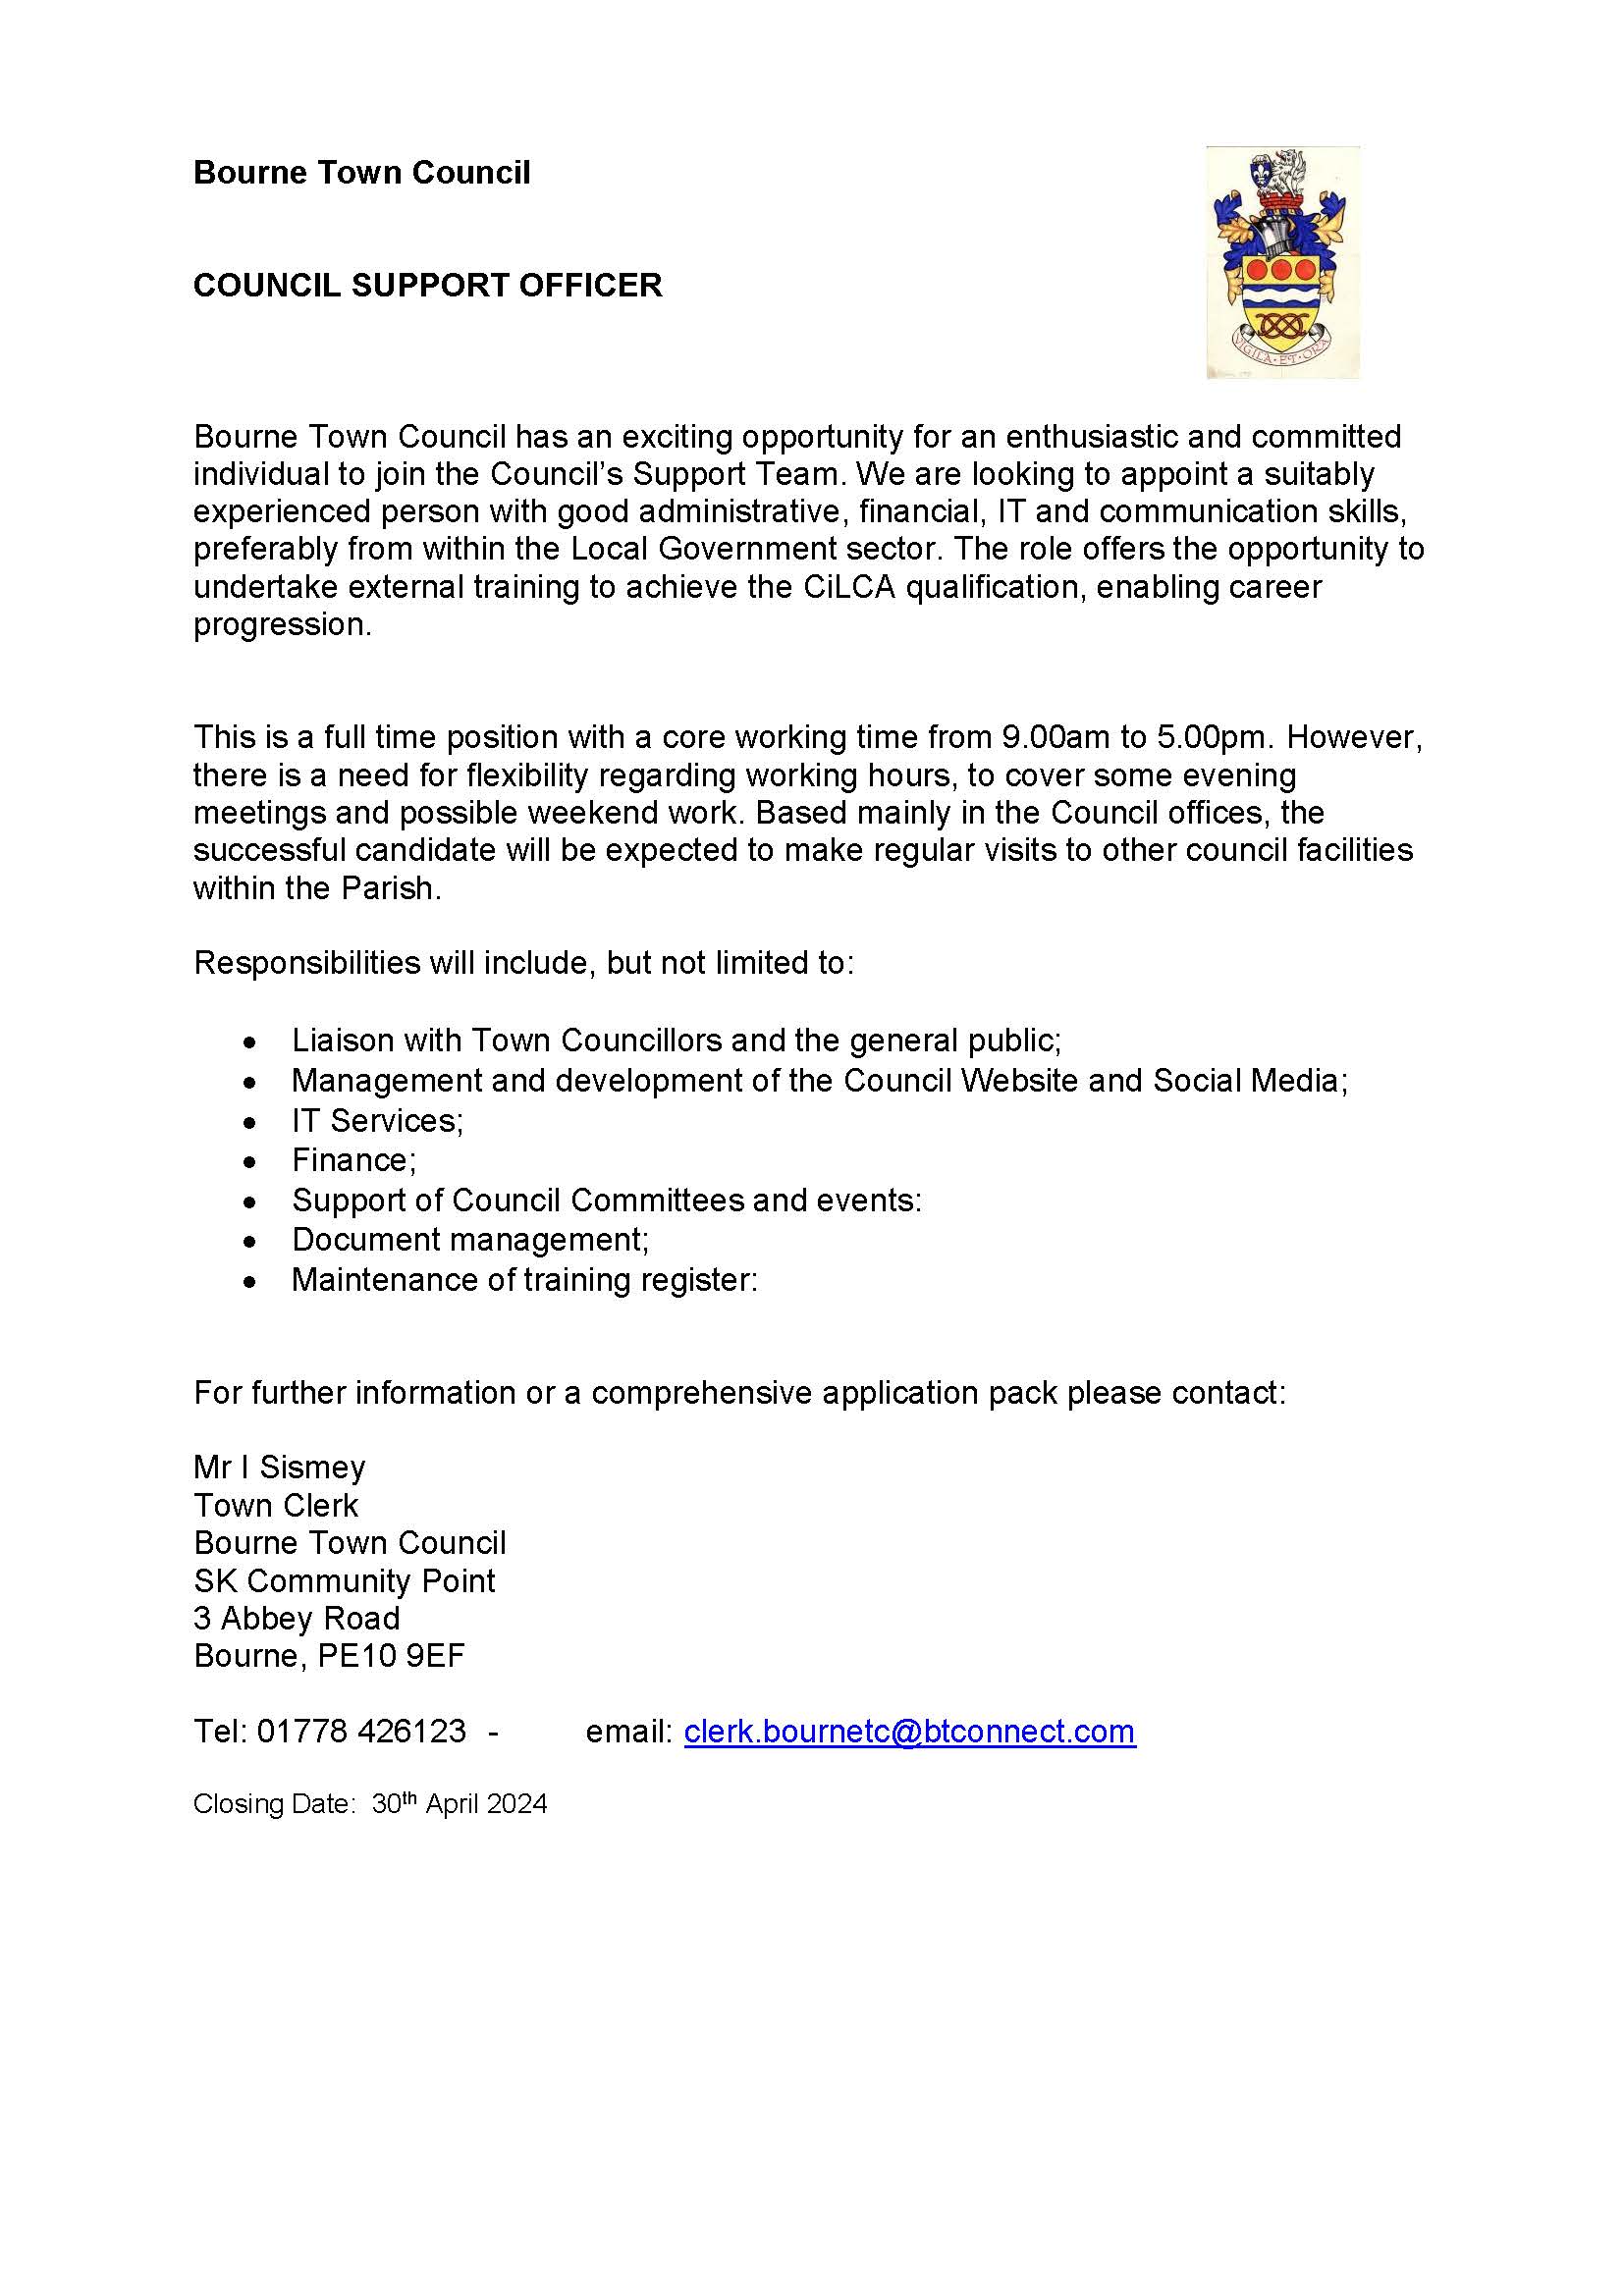 BTC Council Support Officer Vacancy